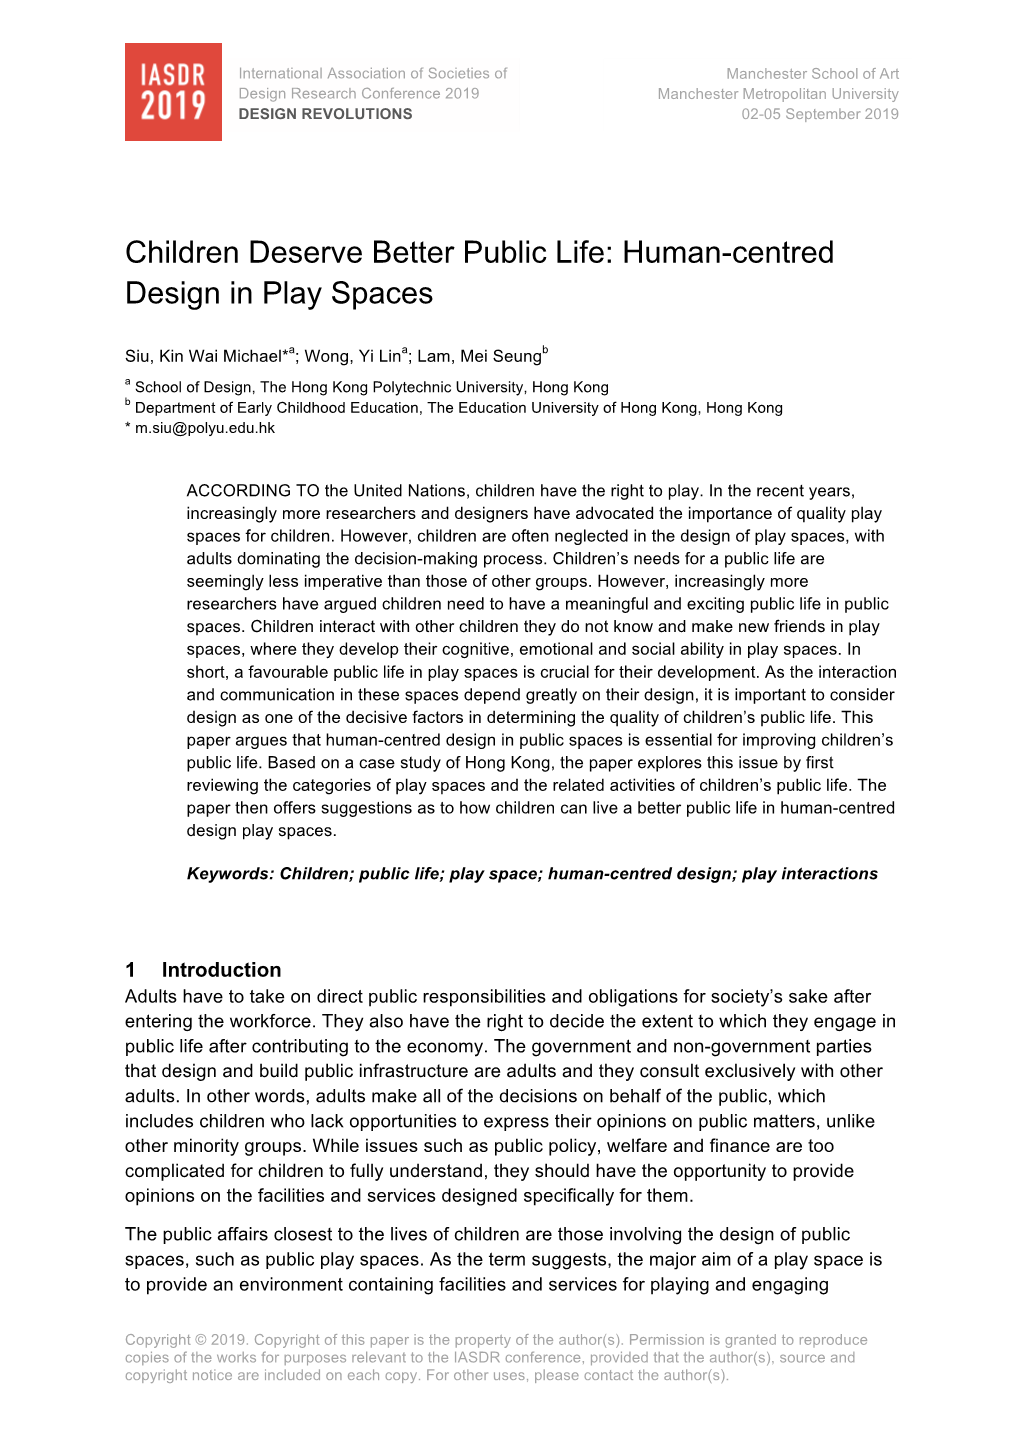 Children Deserve Better Public Life: Human-Centred Design in Play Spaces